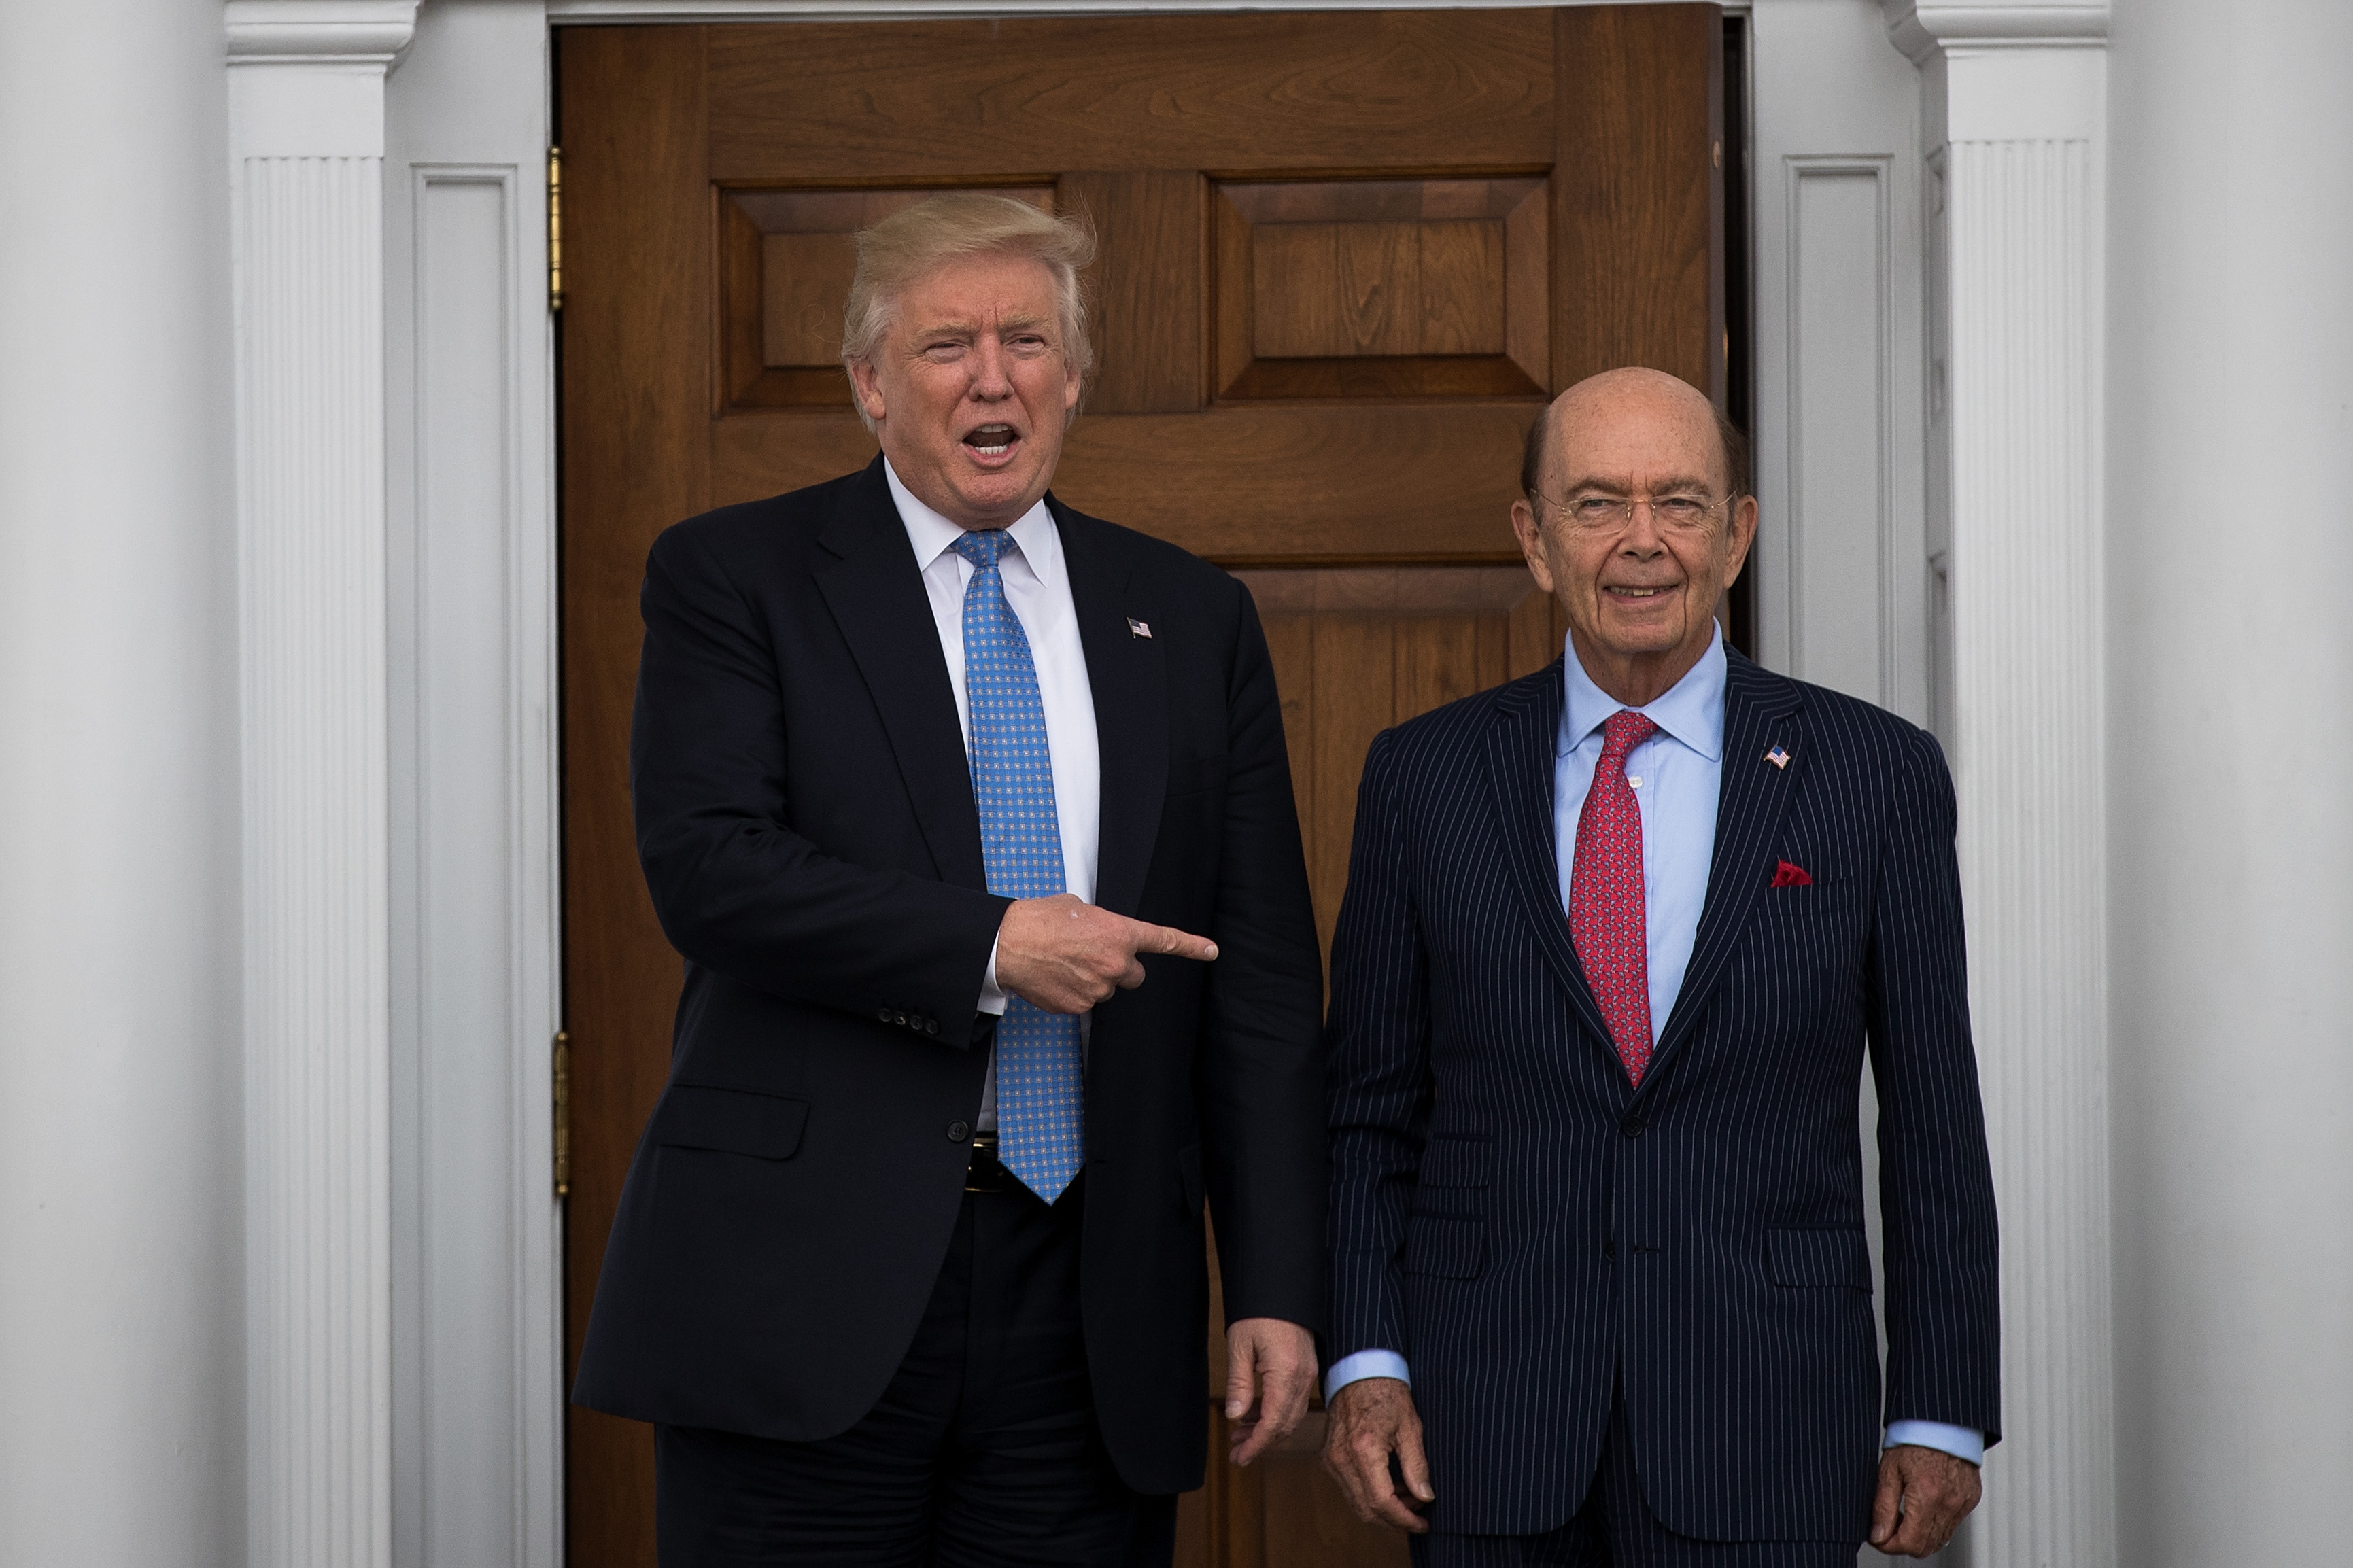 Forbes Just Deleted Trump’s Commerce Secretary Wilbur Ross From Its Billionaires List. Here’s Why